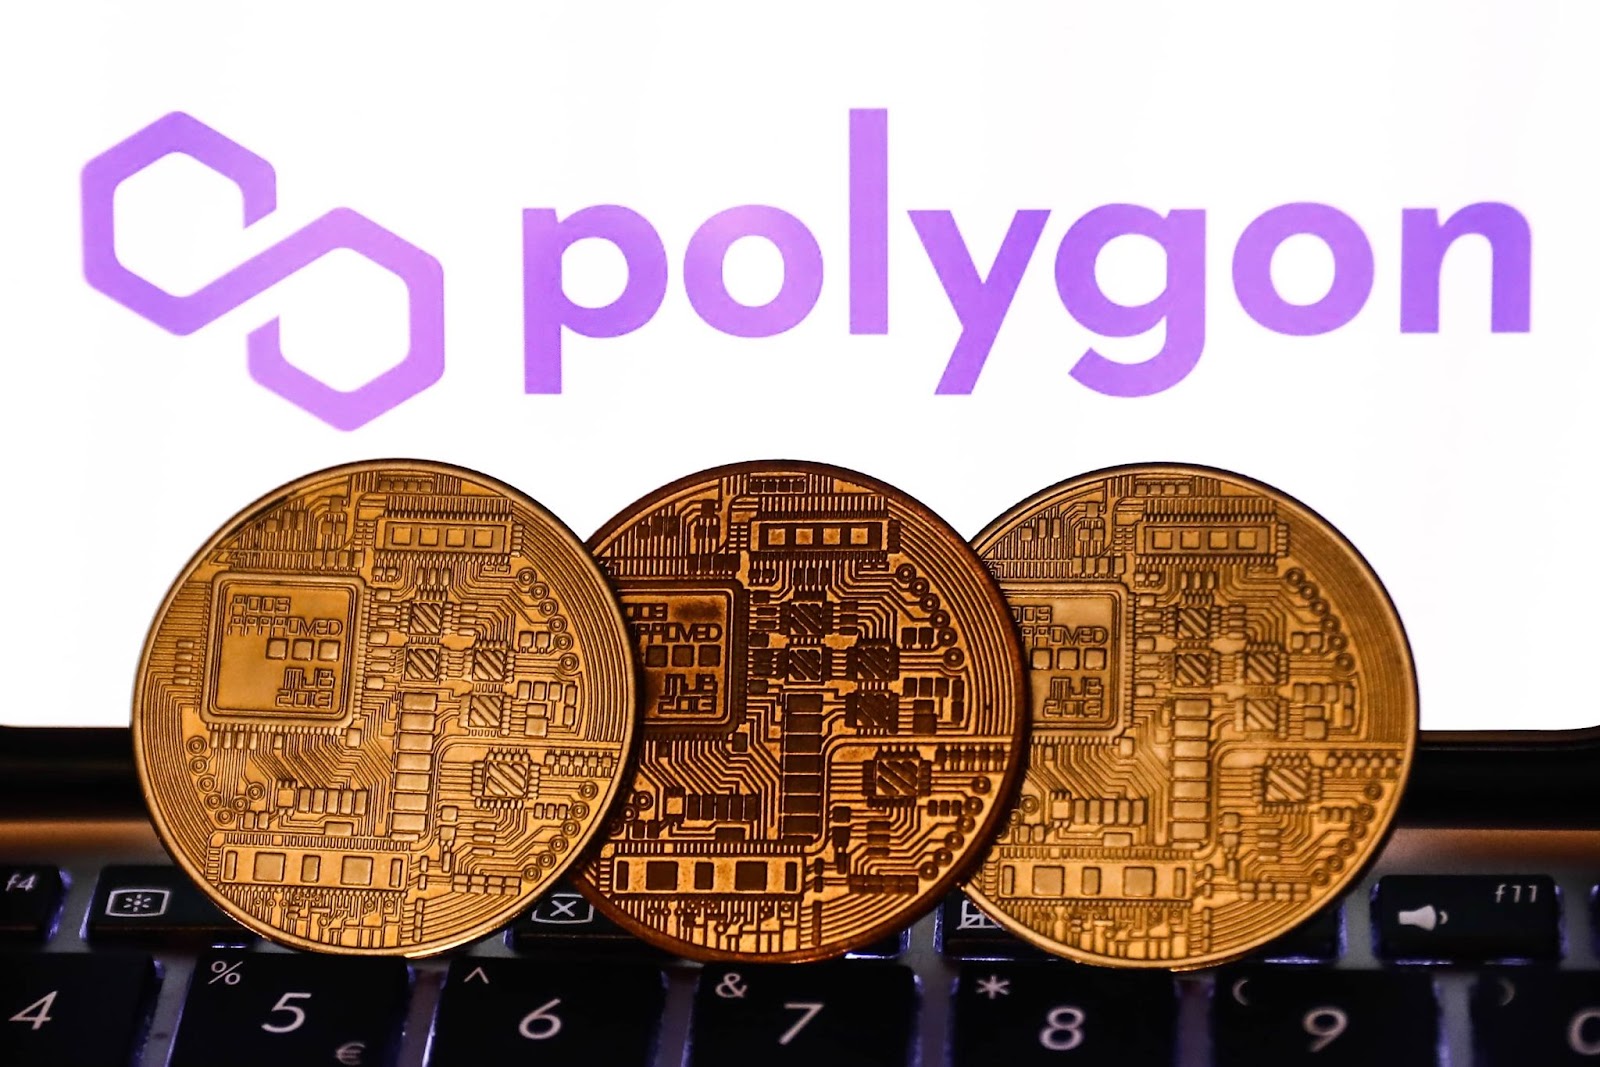 Polygon Tests Key Support: A Turnaround in Sight?